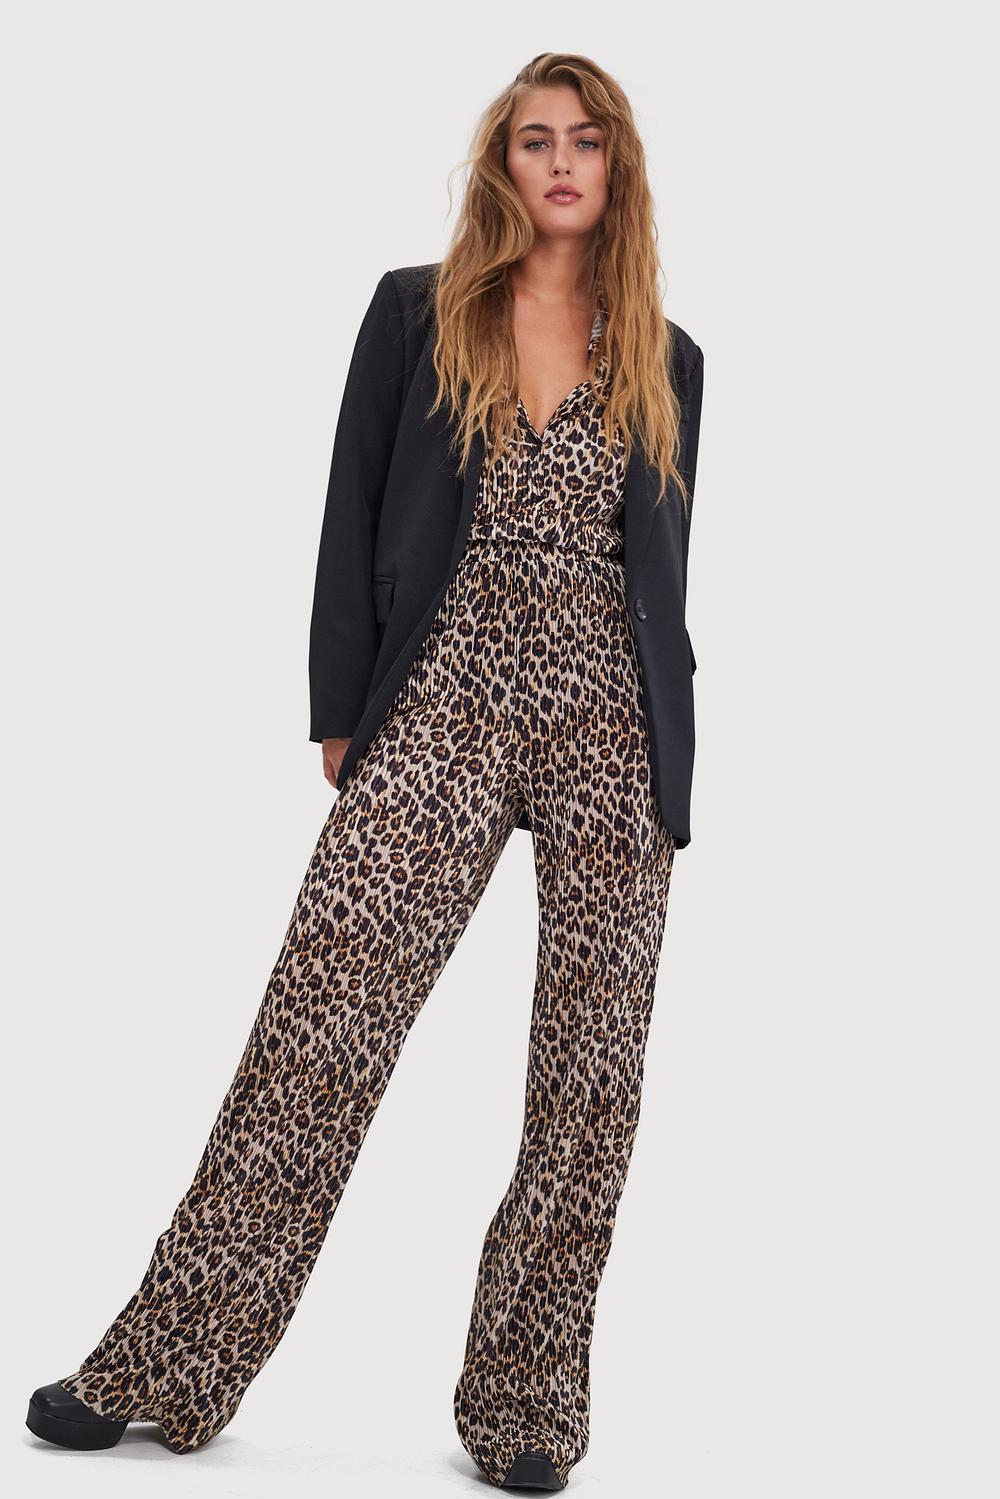 Brown trousers with leopard print